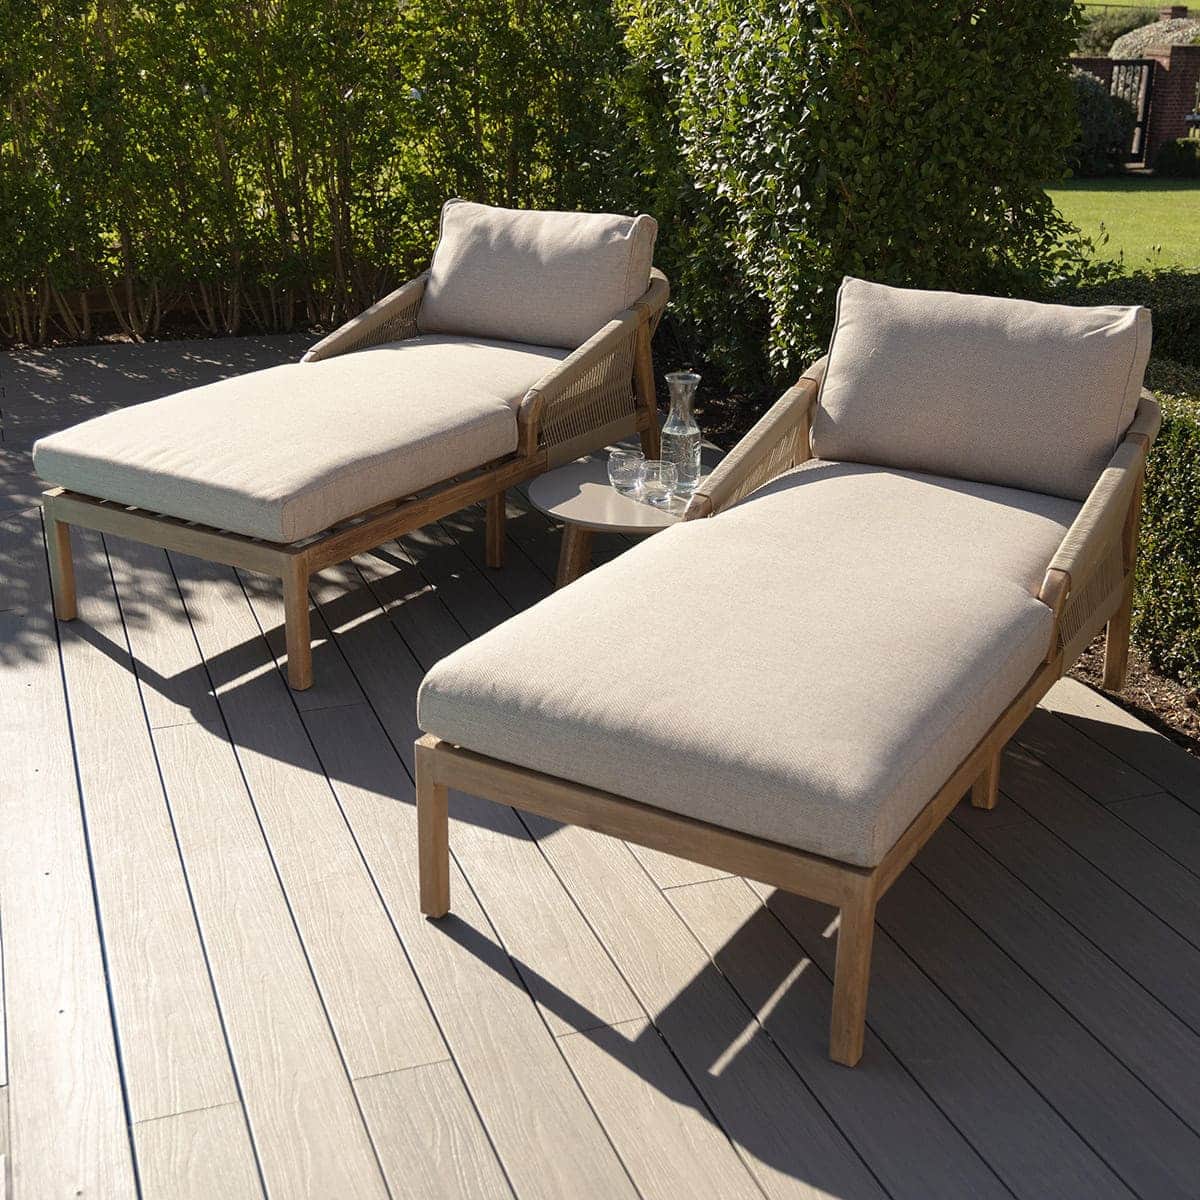 Rope Double Sunlounger Set